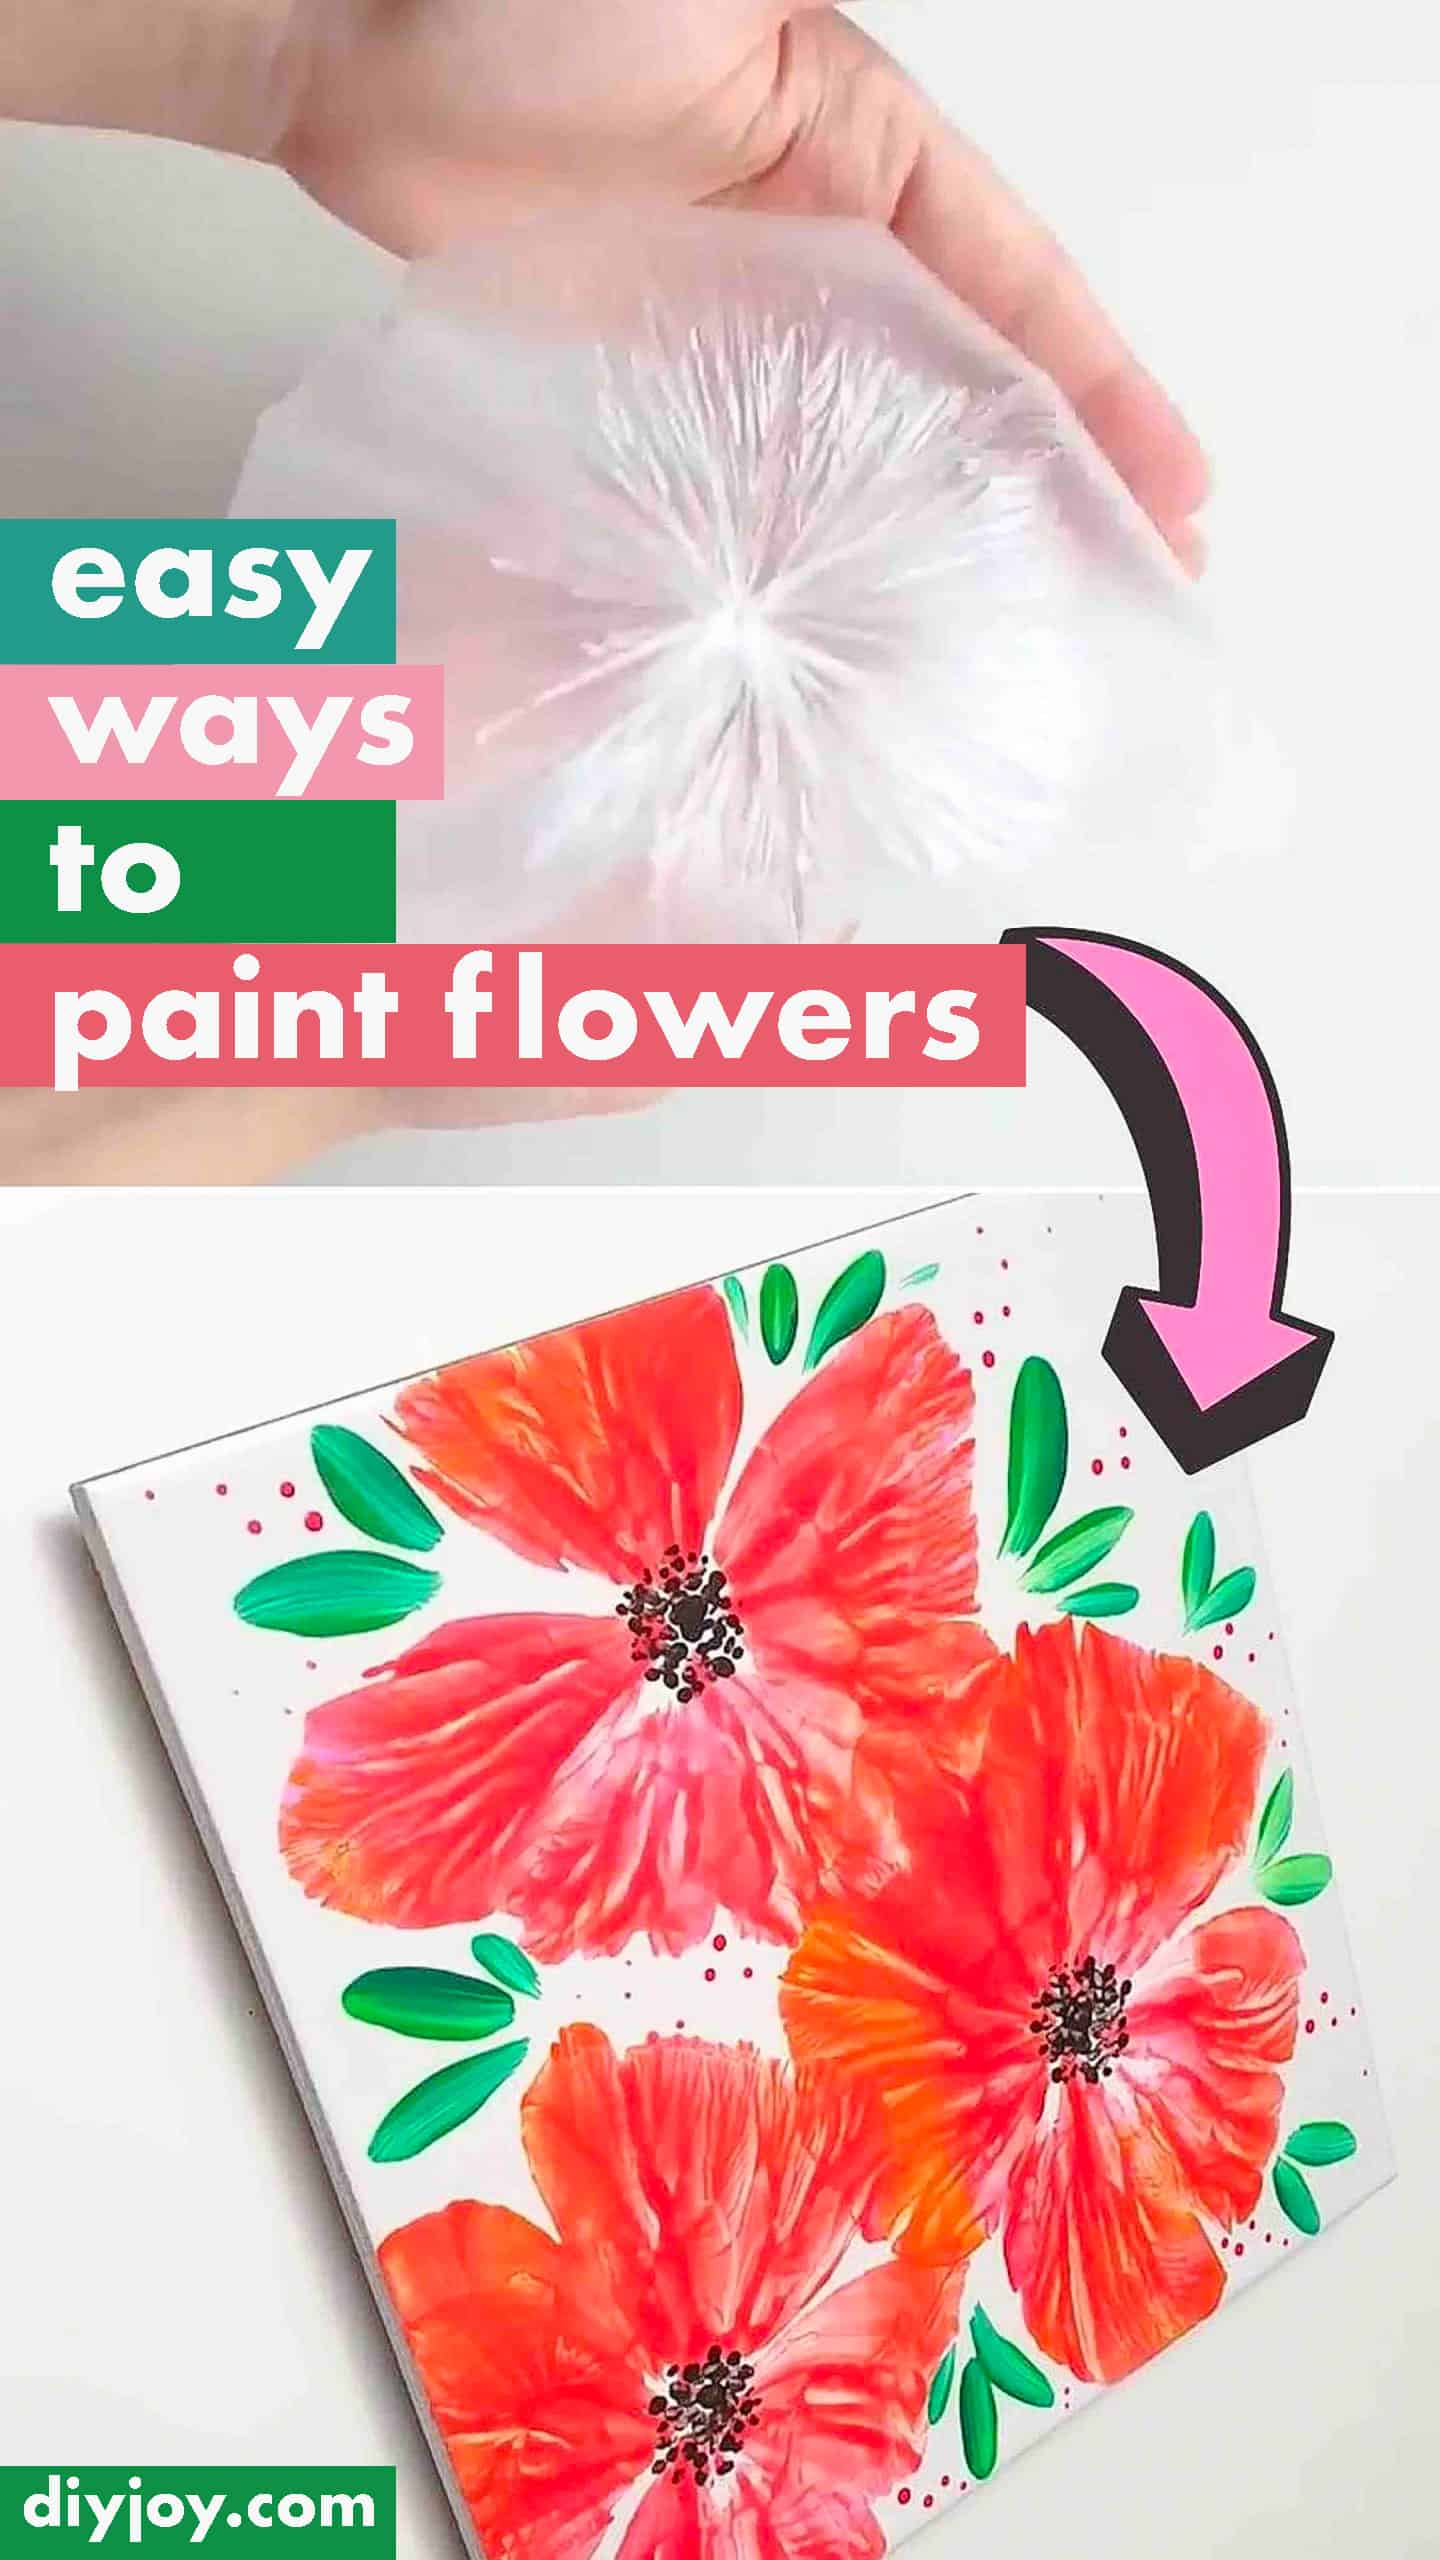 How to Paint Flowers - Easy Ways to Paint Flowers With Plastic Bag